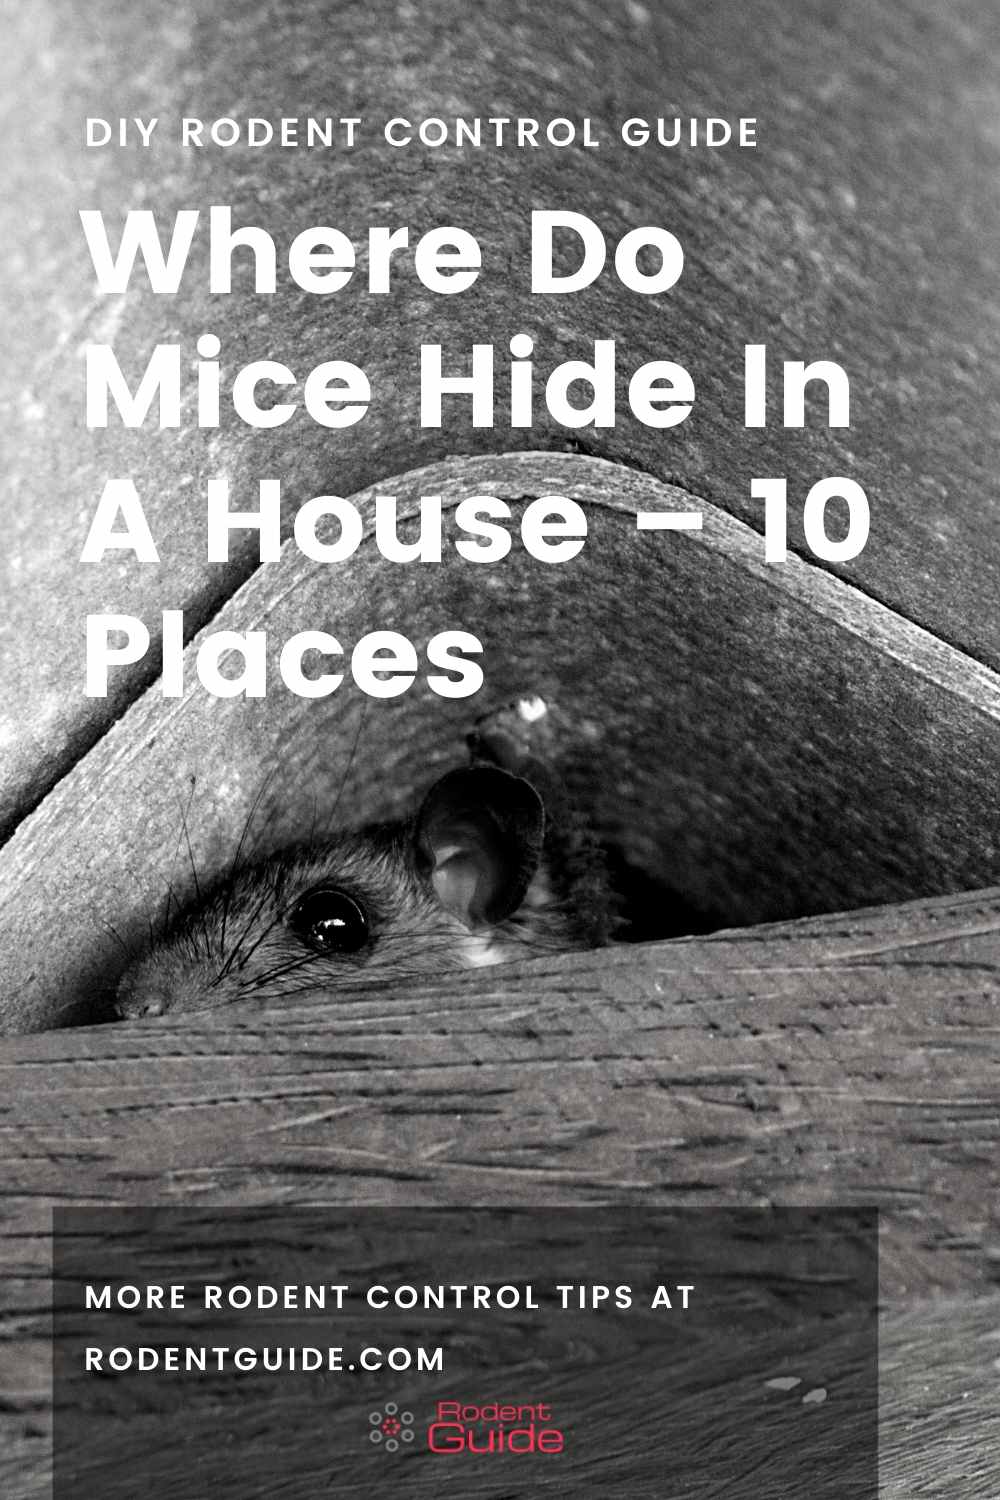 Where Do Mice Hide In A House